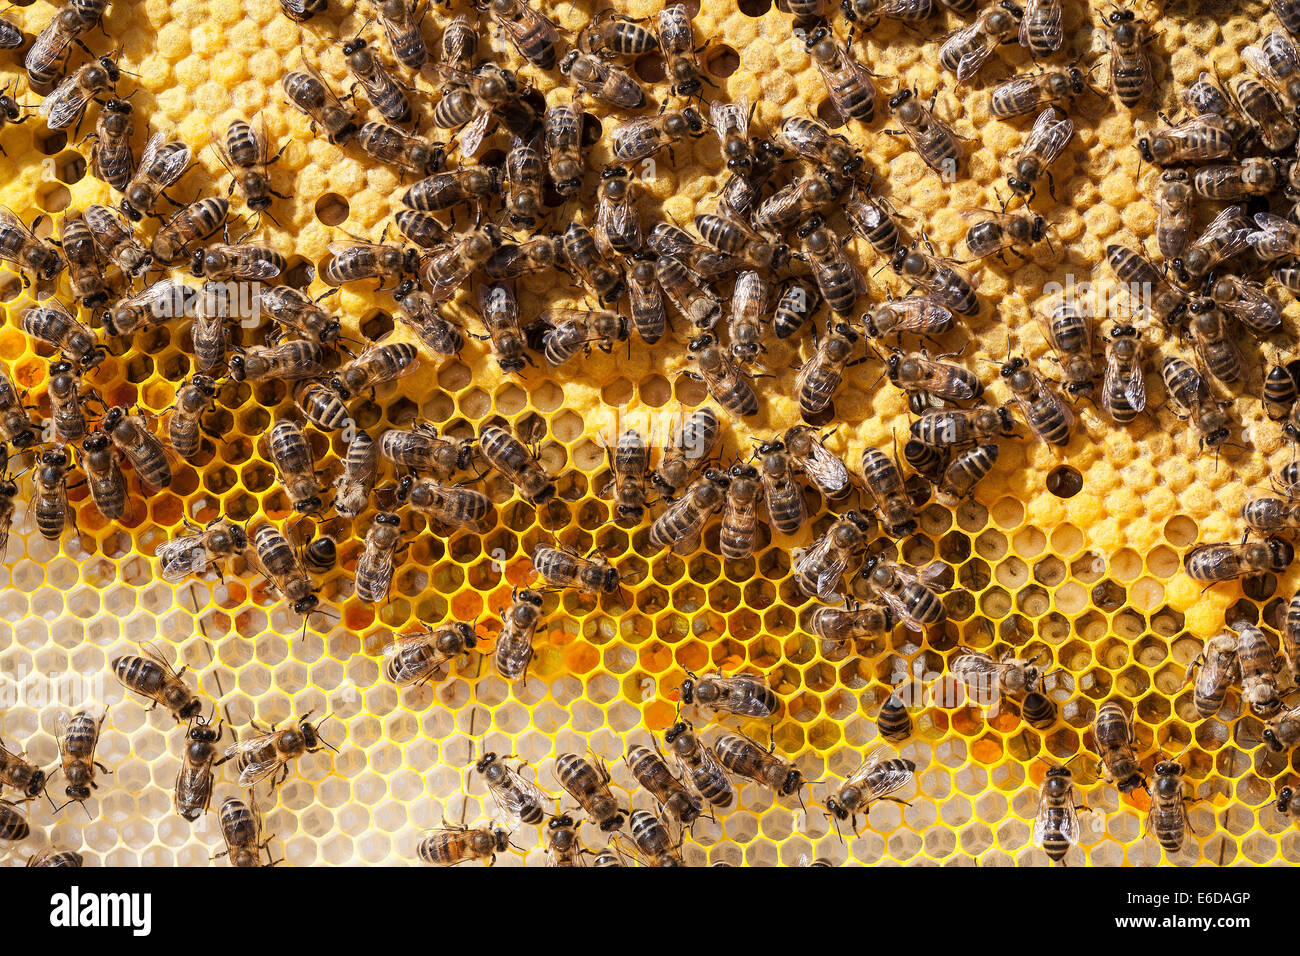 English worker honeybees in hive tending and feeding recently 7 day old hatched larvae, sealed brood and newly laid eggs. UK Stock Photo